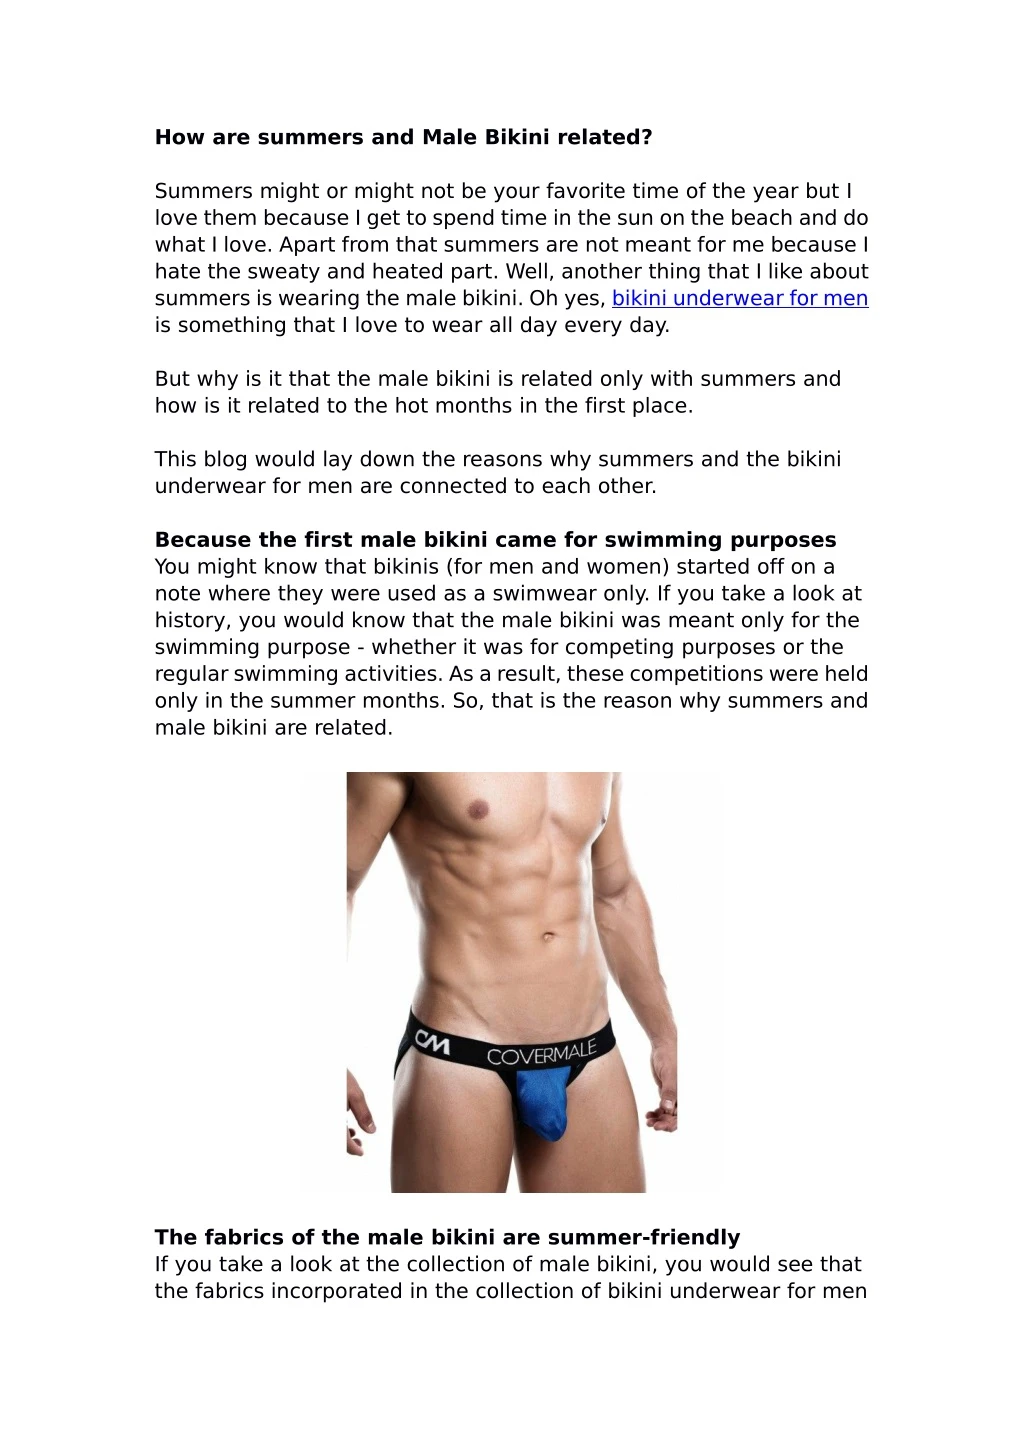 how are summers and male bikini related